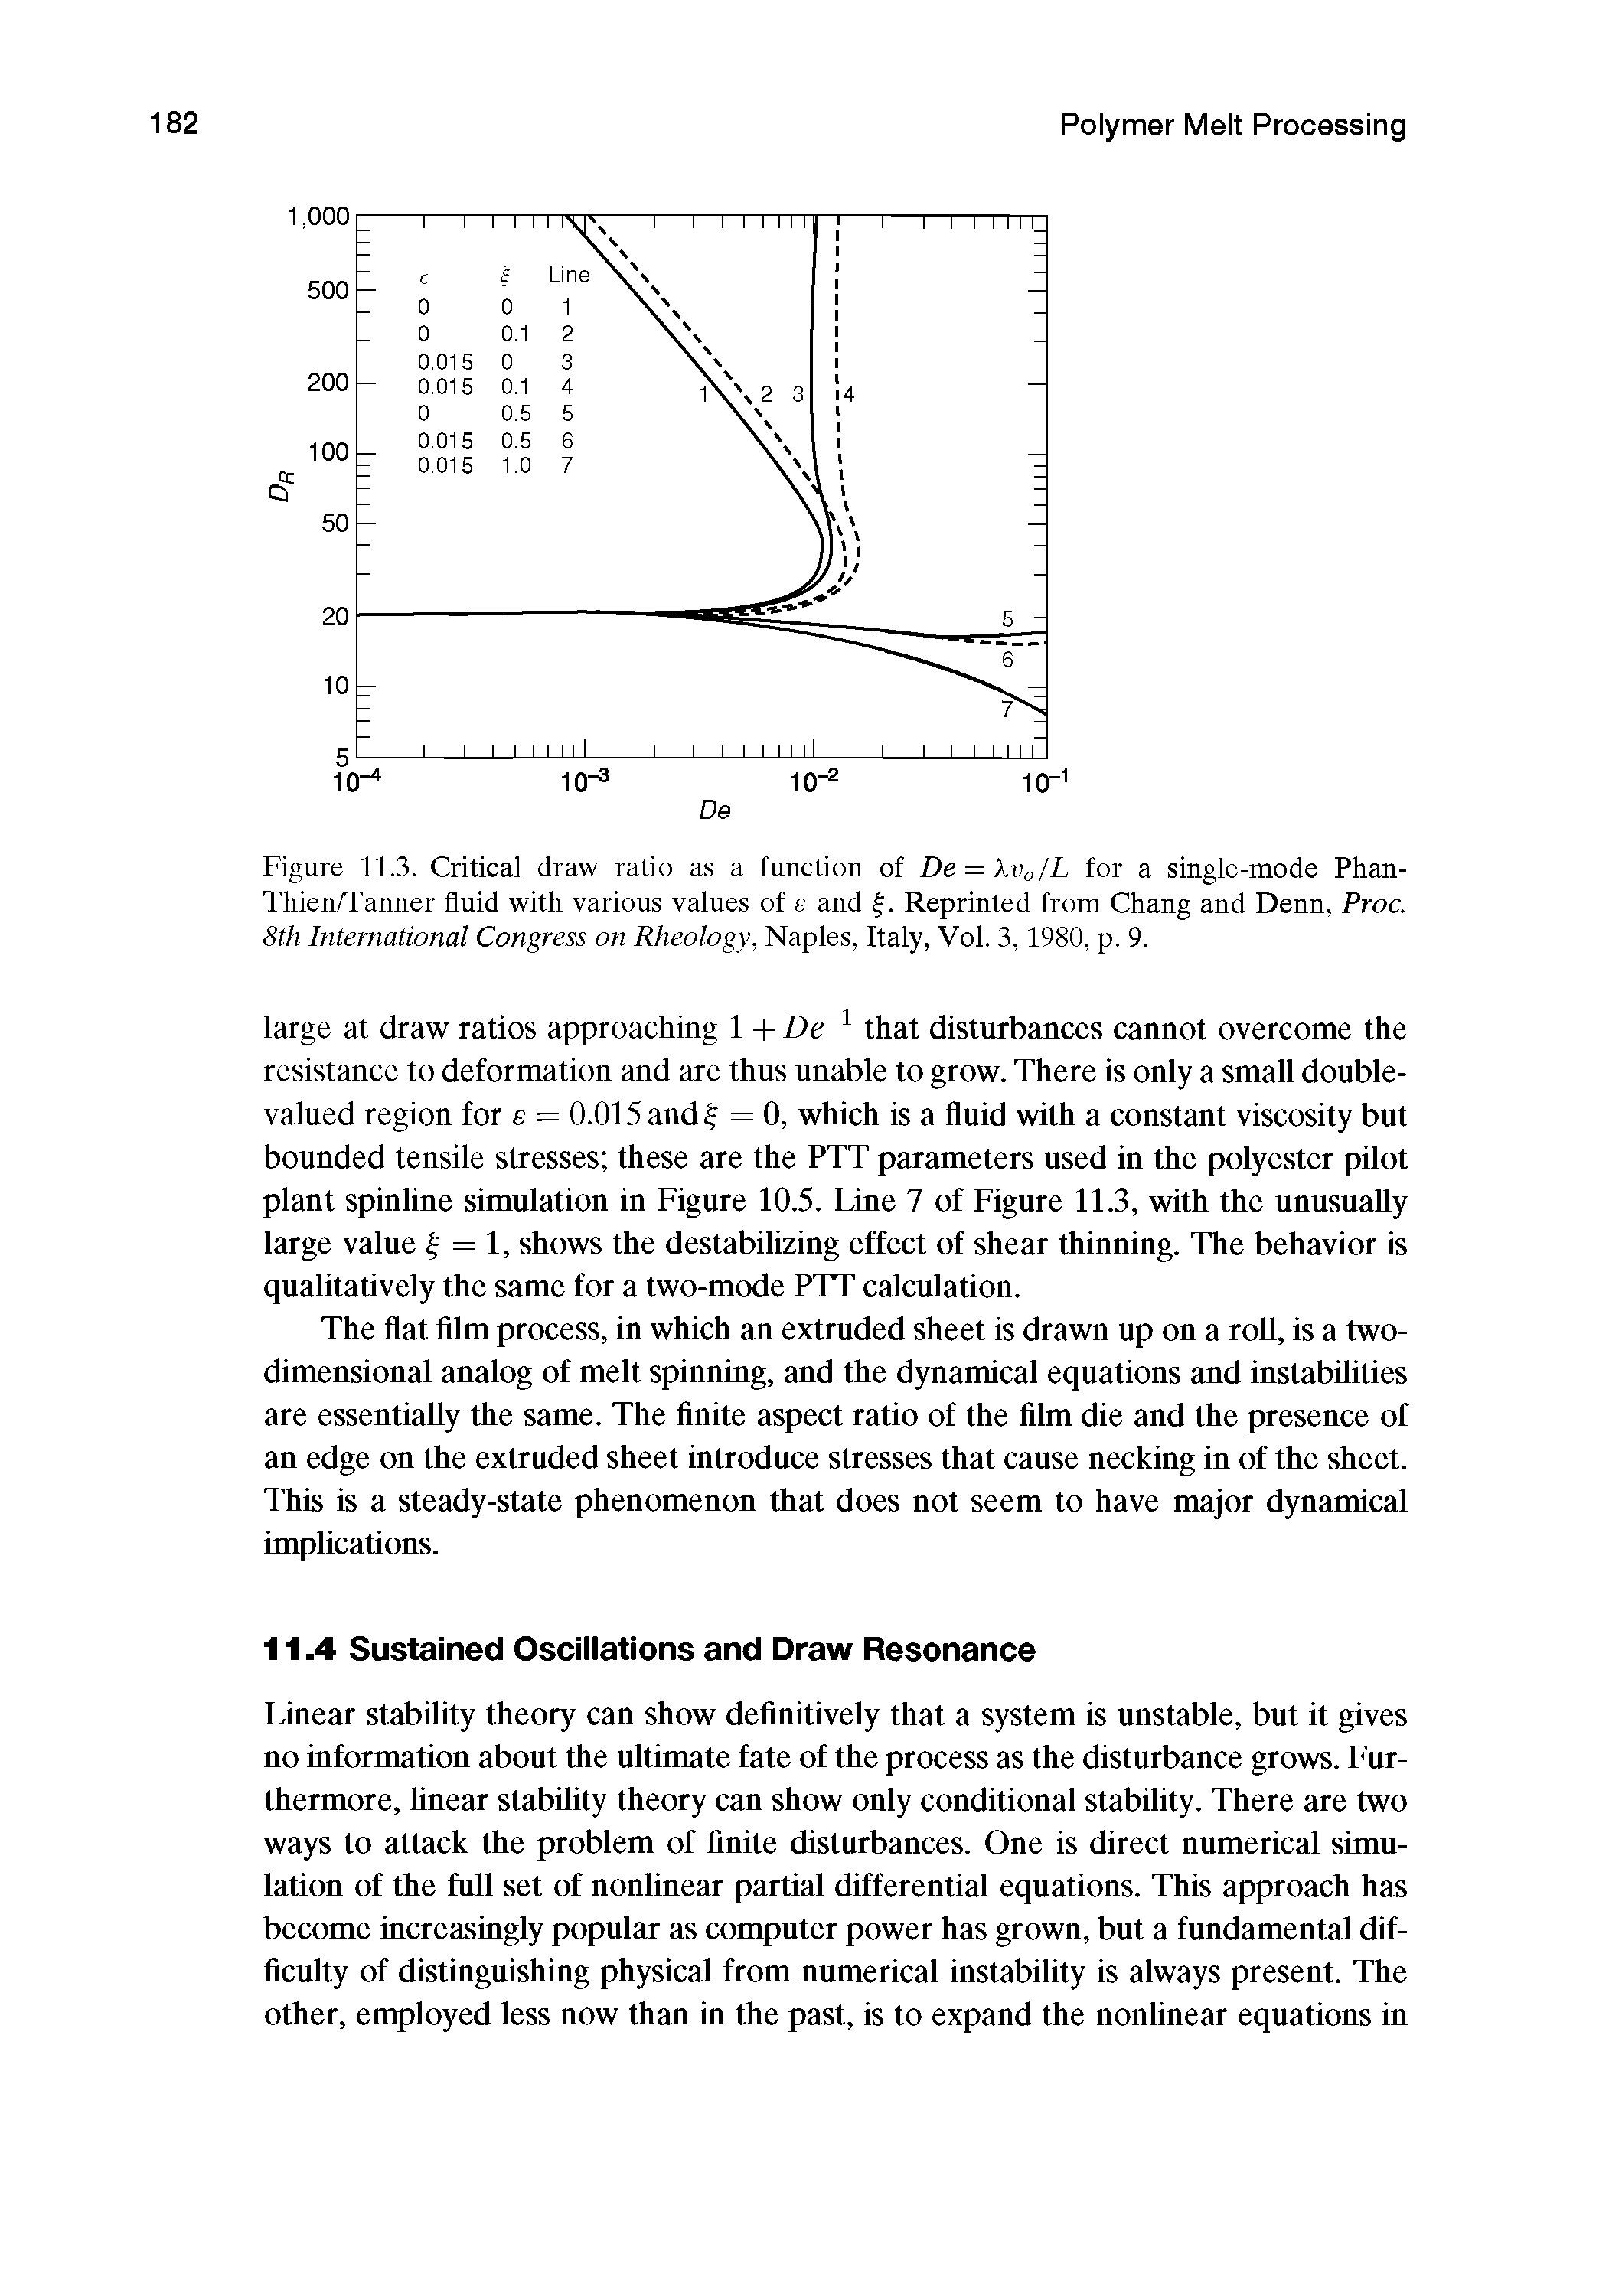 Figure 11.3. Critical draw ratio as a function of De = Xvo/L for a single-mode Phan-Thien/Tanner fluid with various values of e and Reprinted from Chang and Denn, Proc. 8th International Congress on Rheology, Naples, Italy, Vol. 3,1980, p. 9.